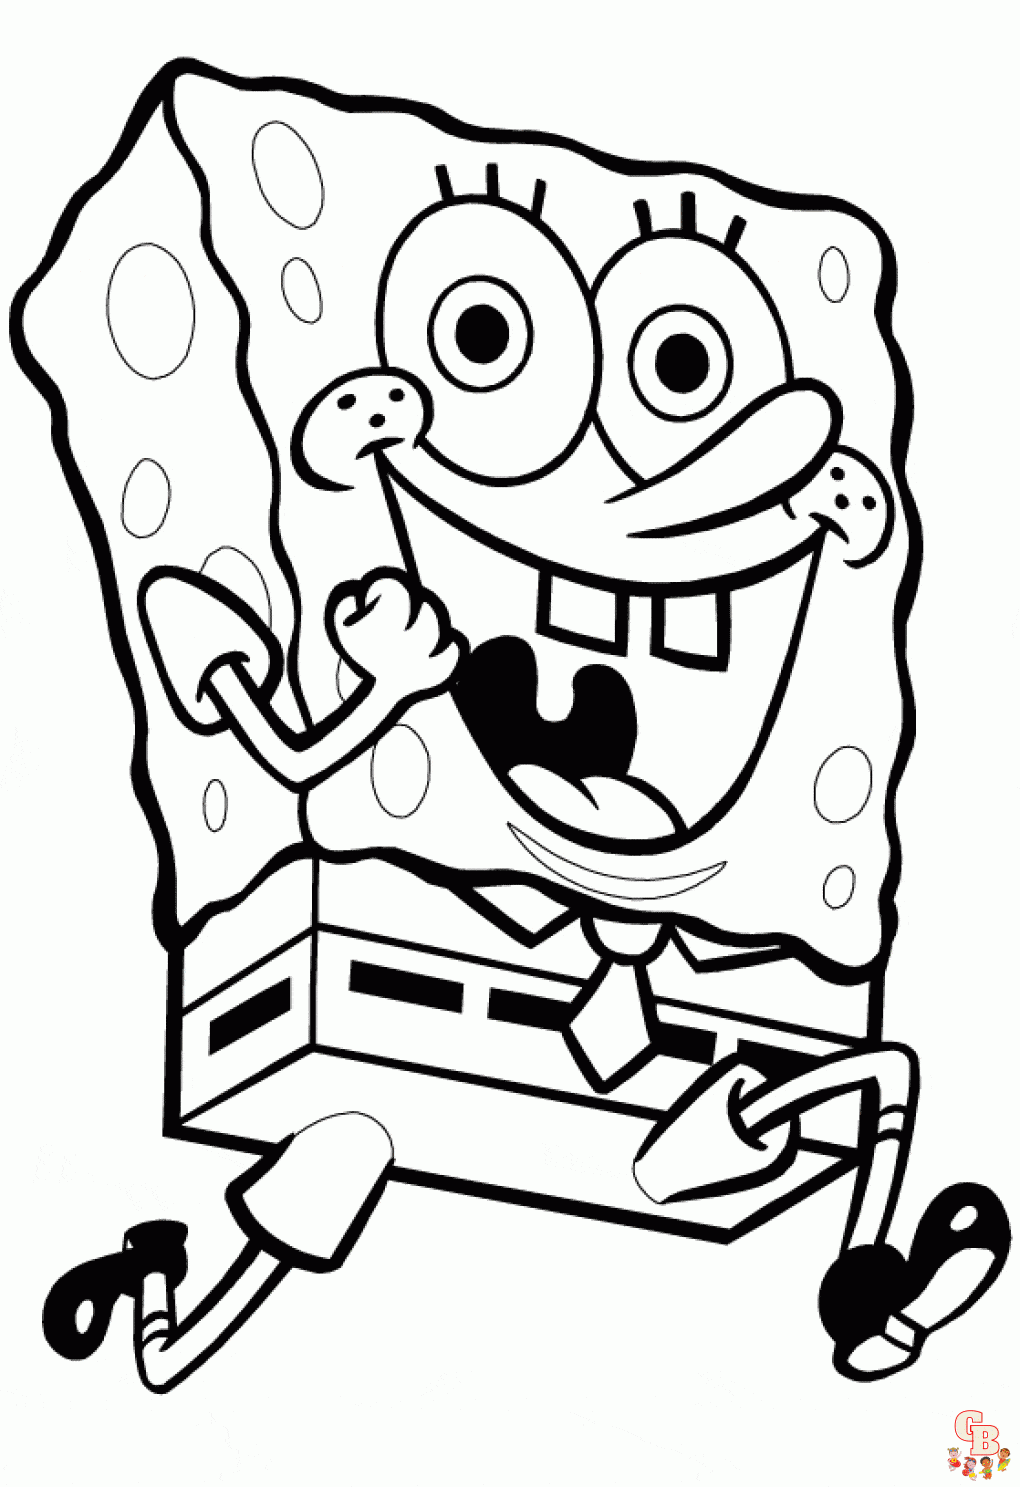 Spongebob coloring pages to print for kids 14